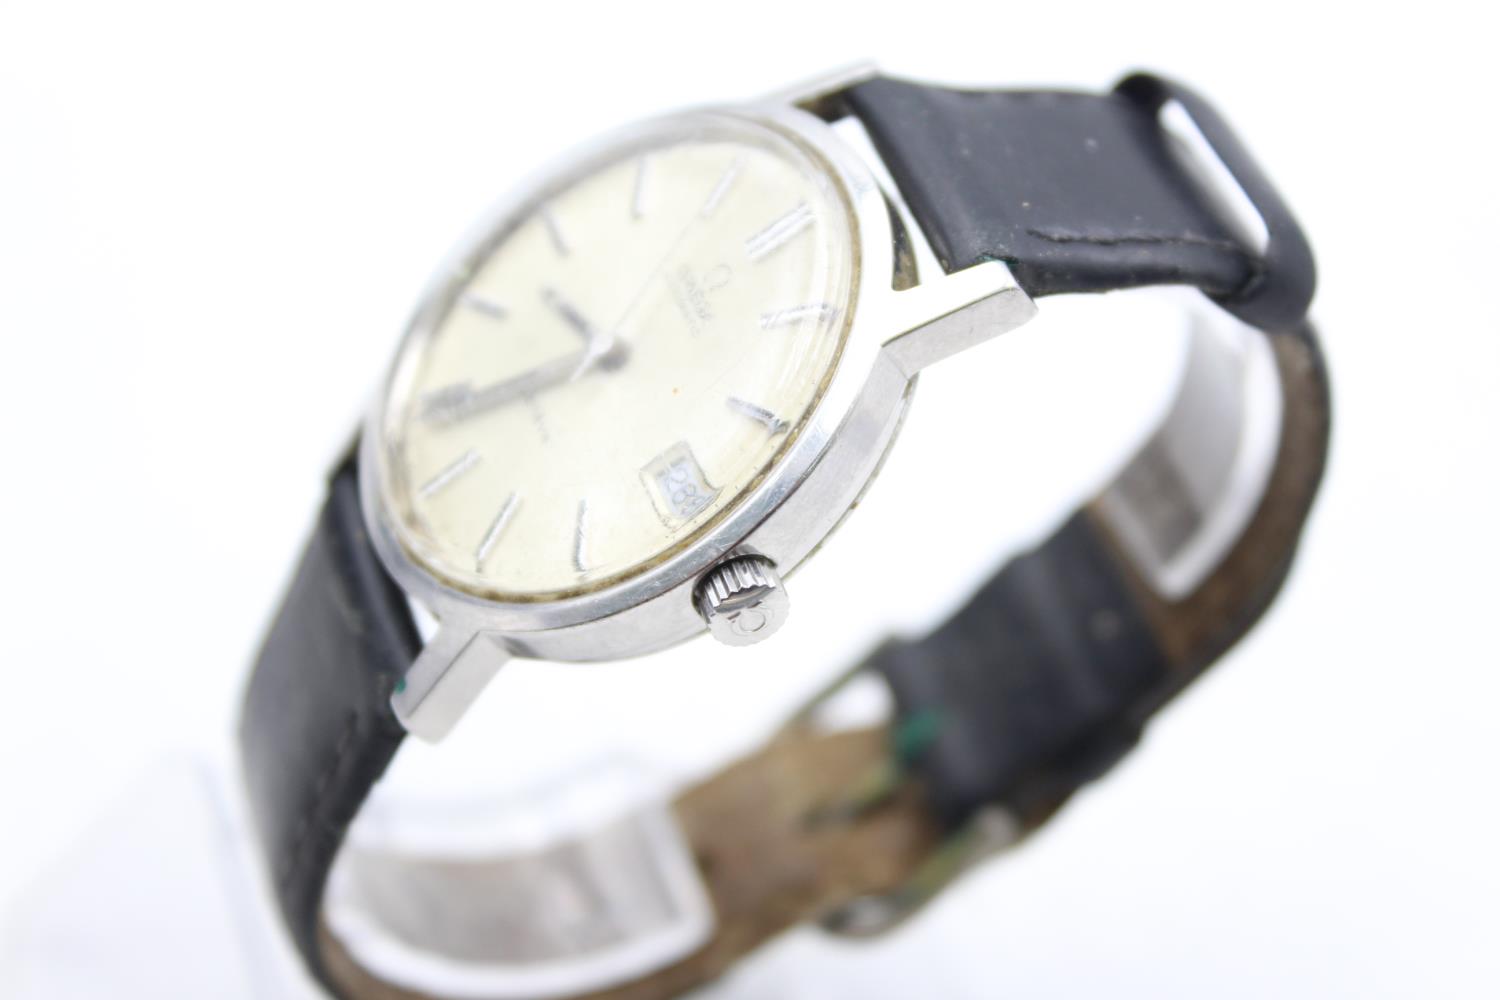 Vintage Gents OMEGA Geneve Stainless Steel Wristwatch Automatic Ref 1660 .163 Vintage Gents OMEGA - Image 3 of 4